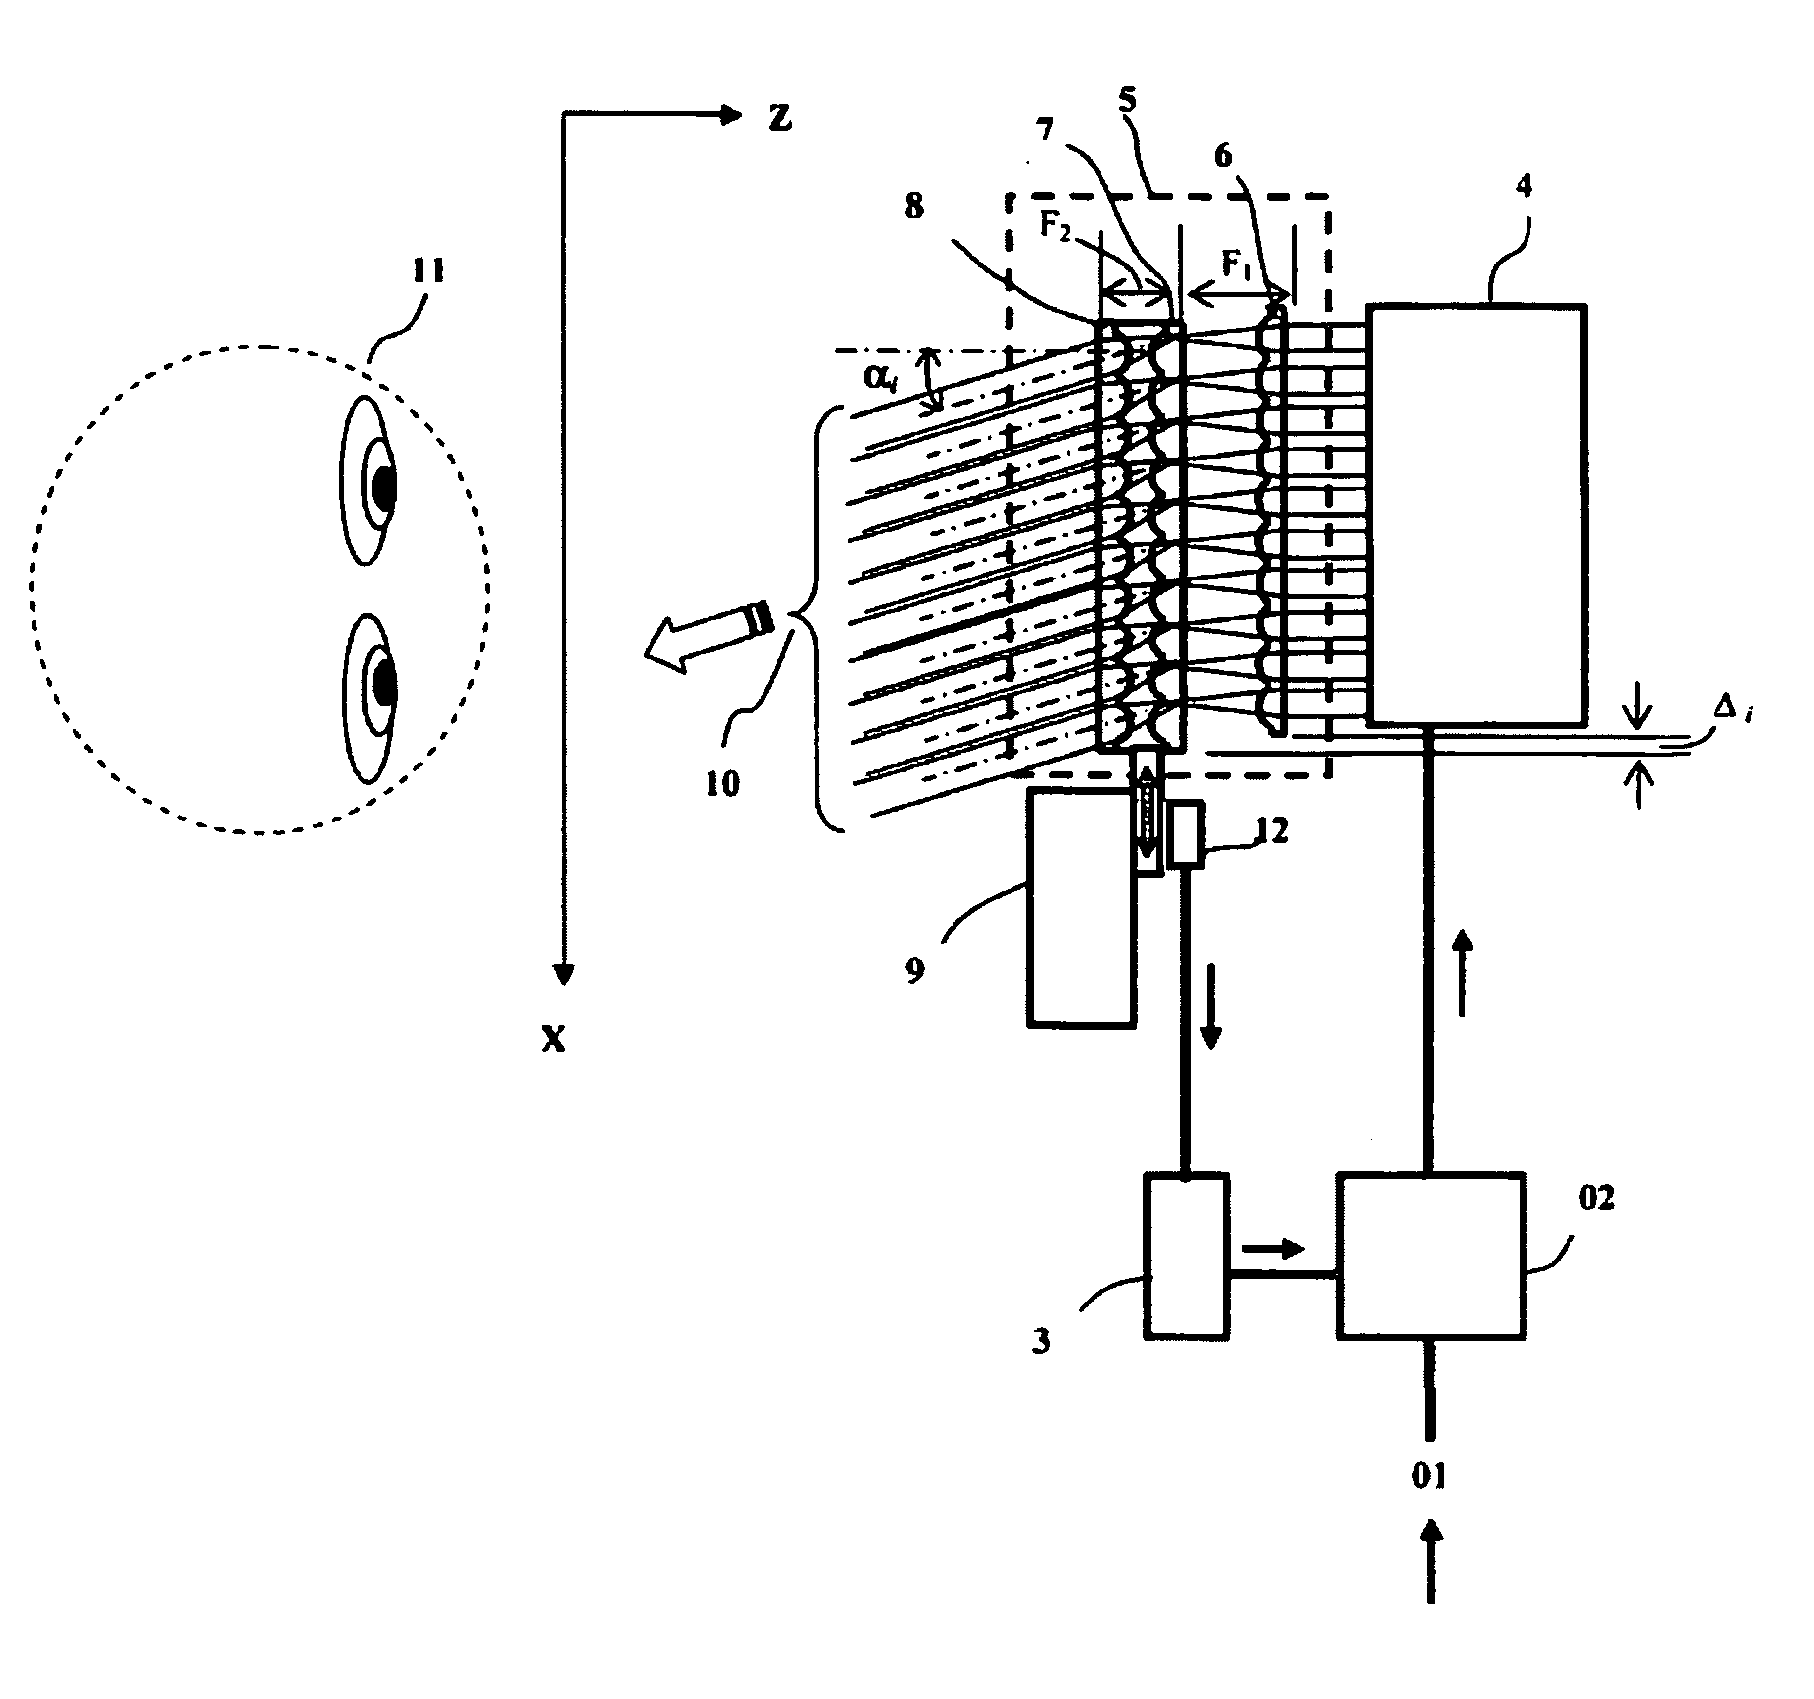 Apparatus and system for reproducing 3-dimensional images